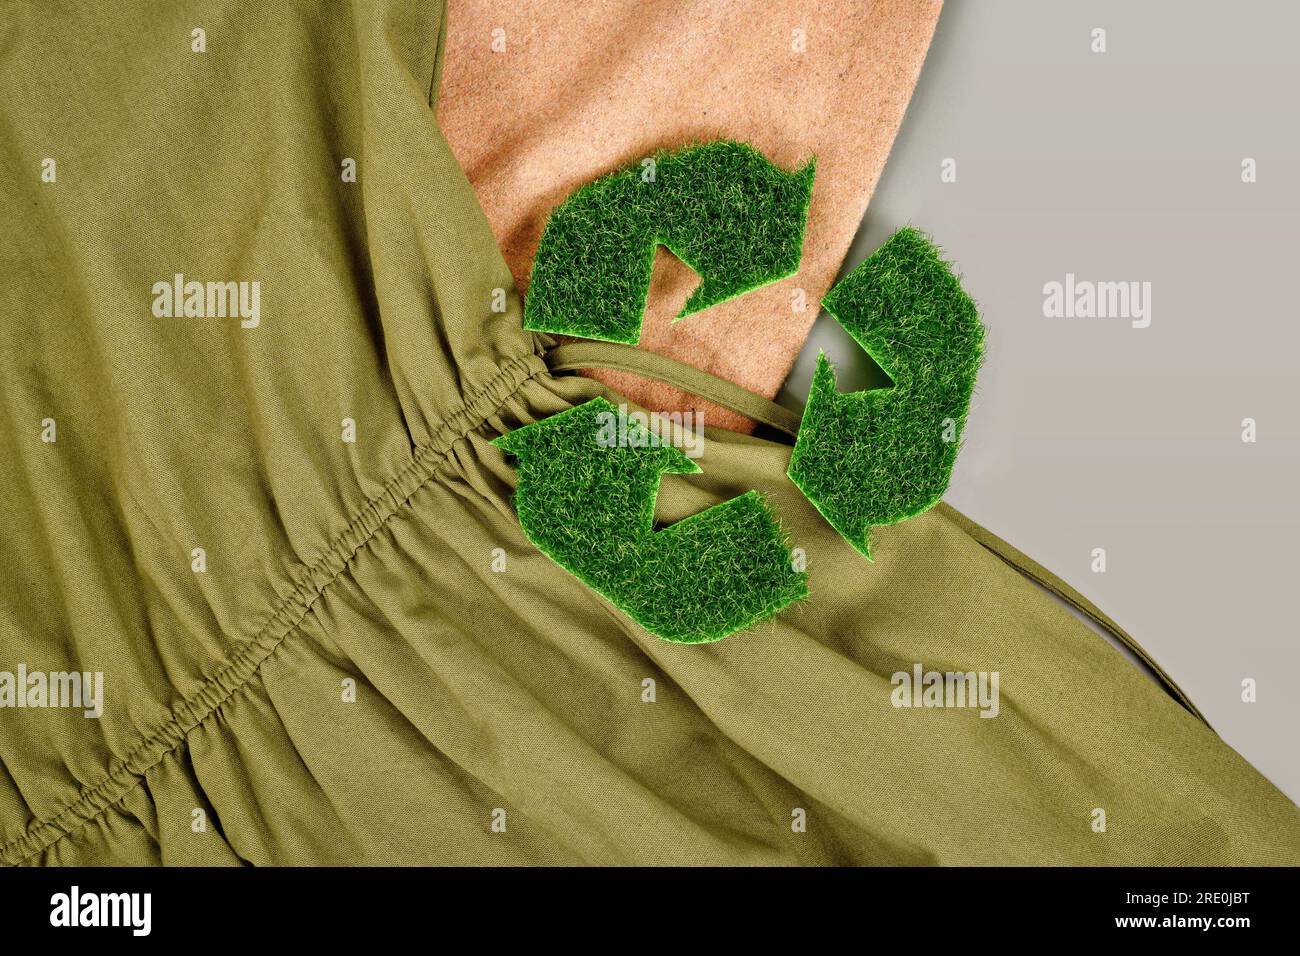 Environmental friendly produced clothing with recycling arrow symbol made out of grass Stock Photo